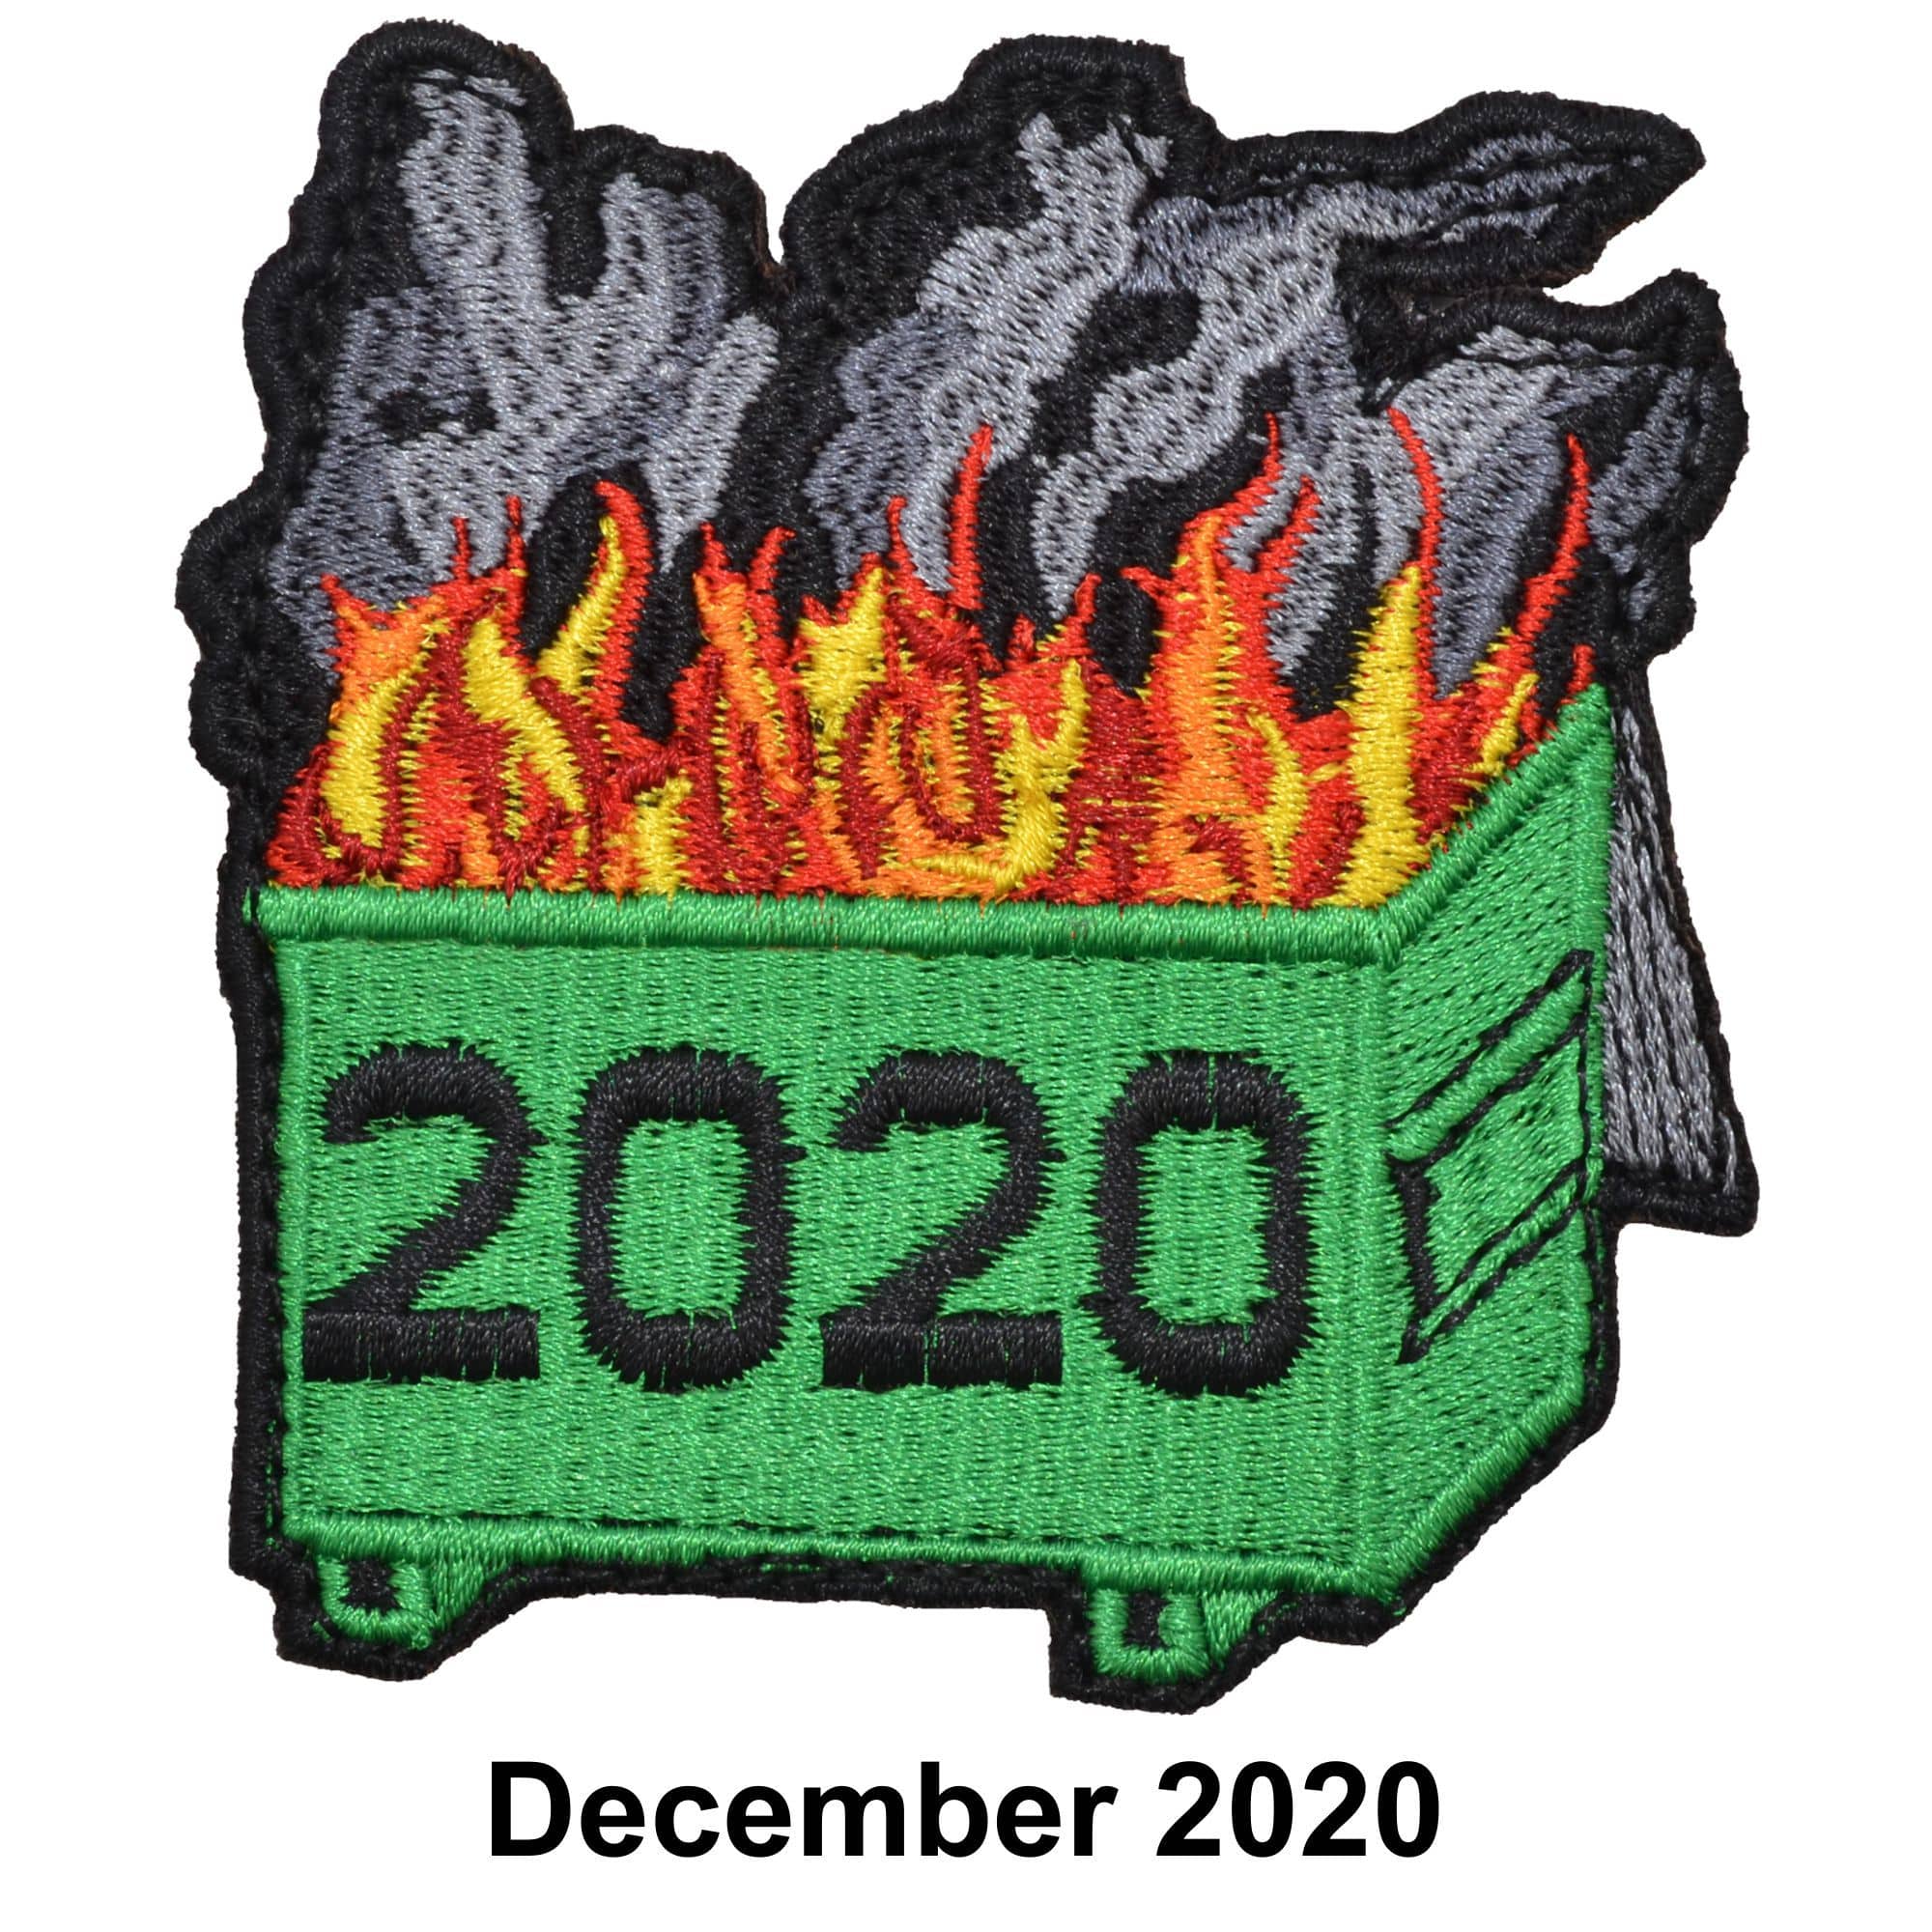 Tactical Gear Junkie Patches December 2020 Patch of the Month - Dumpster Fire